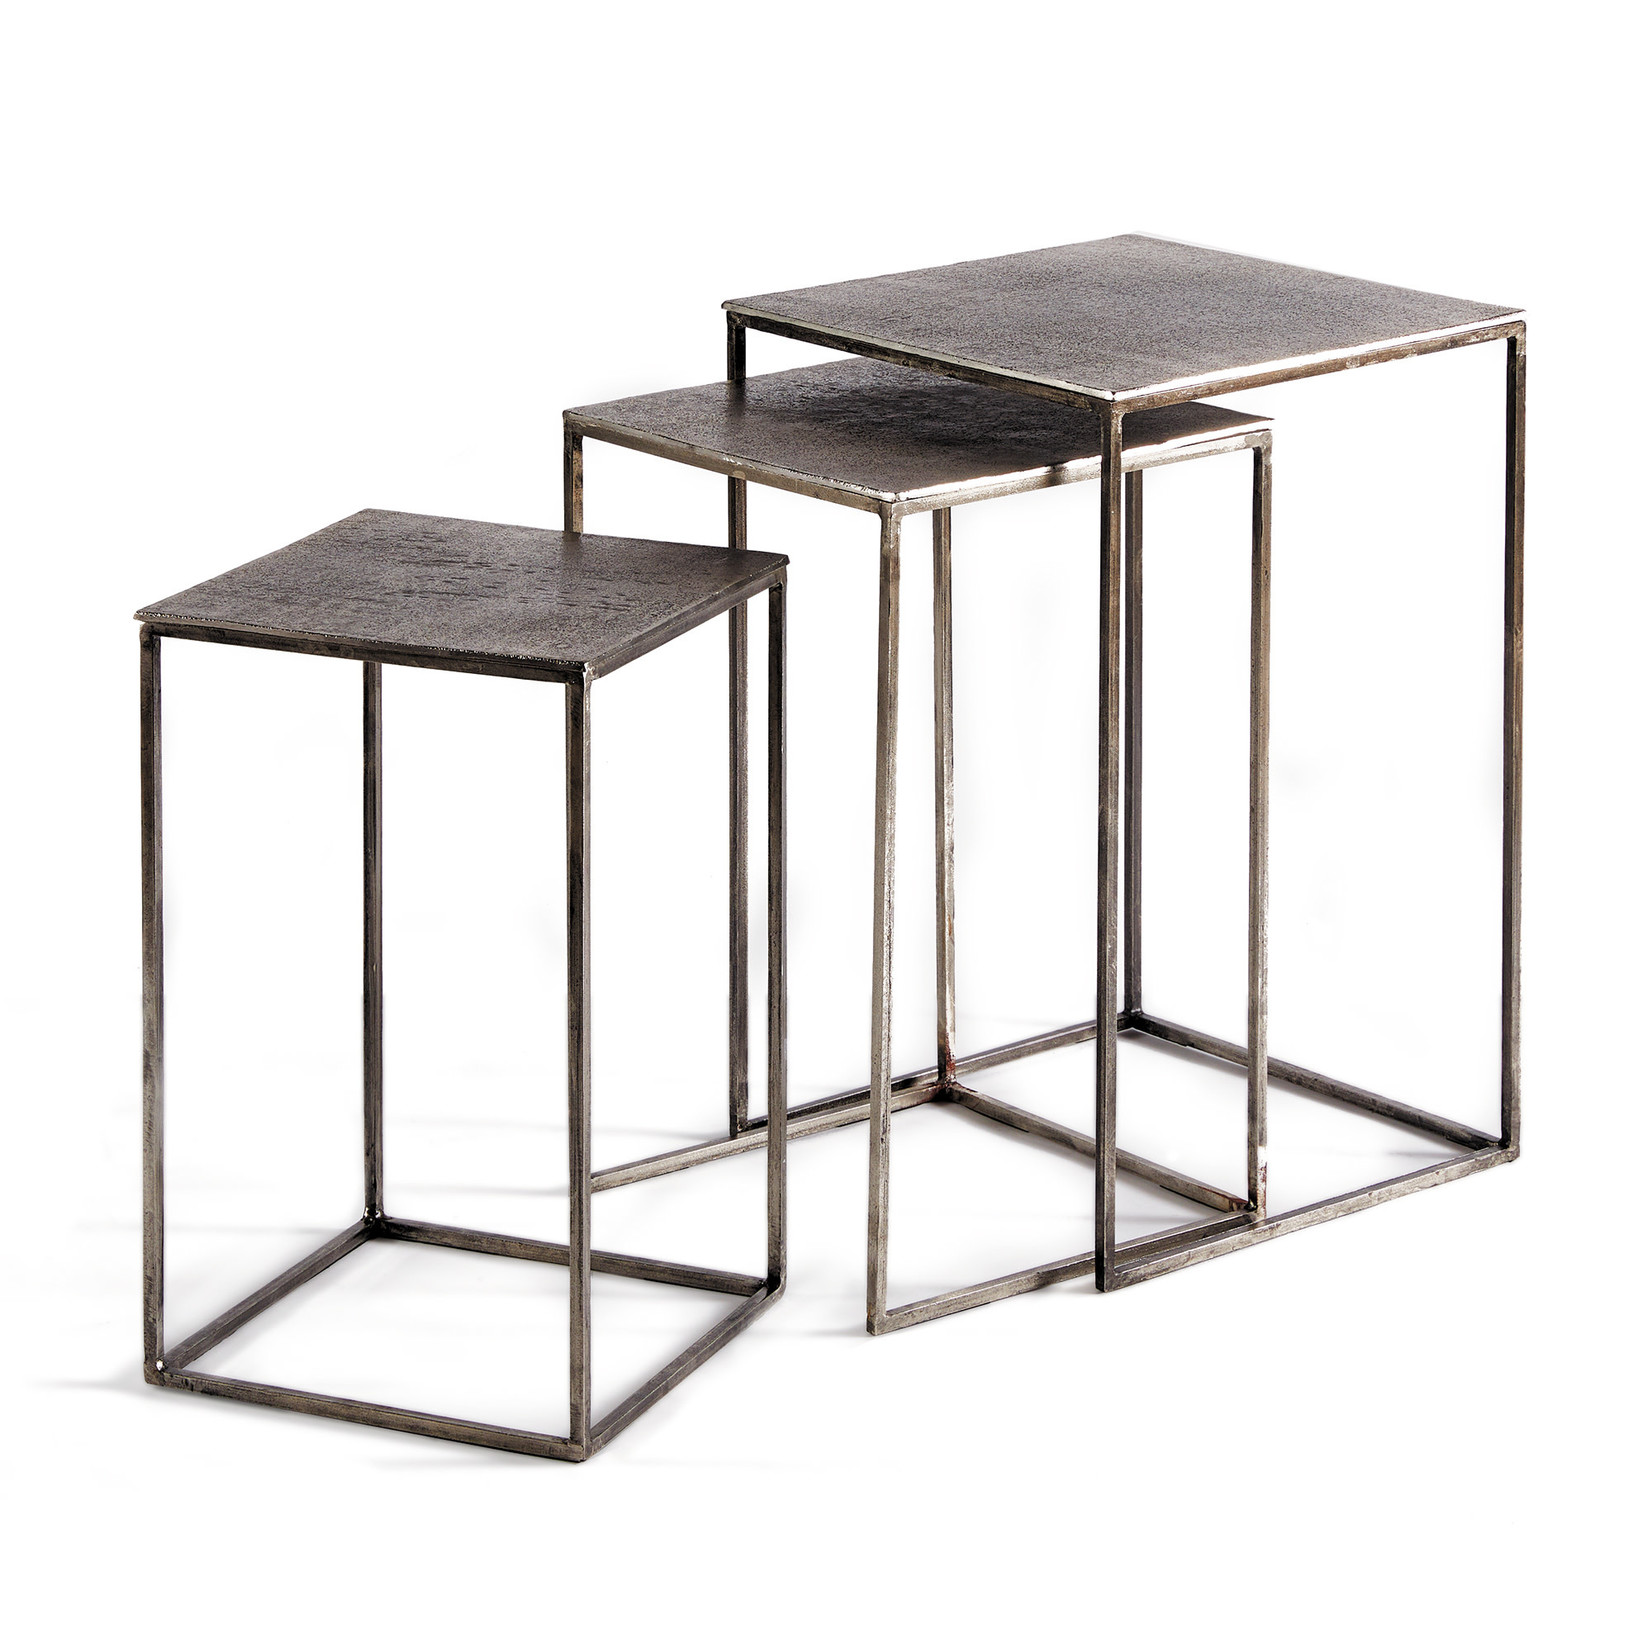 Napa Home and Garden Ridge Nested Square Side Tables  S/3